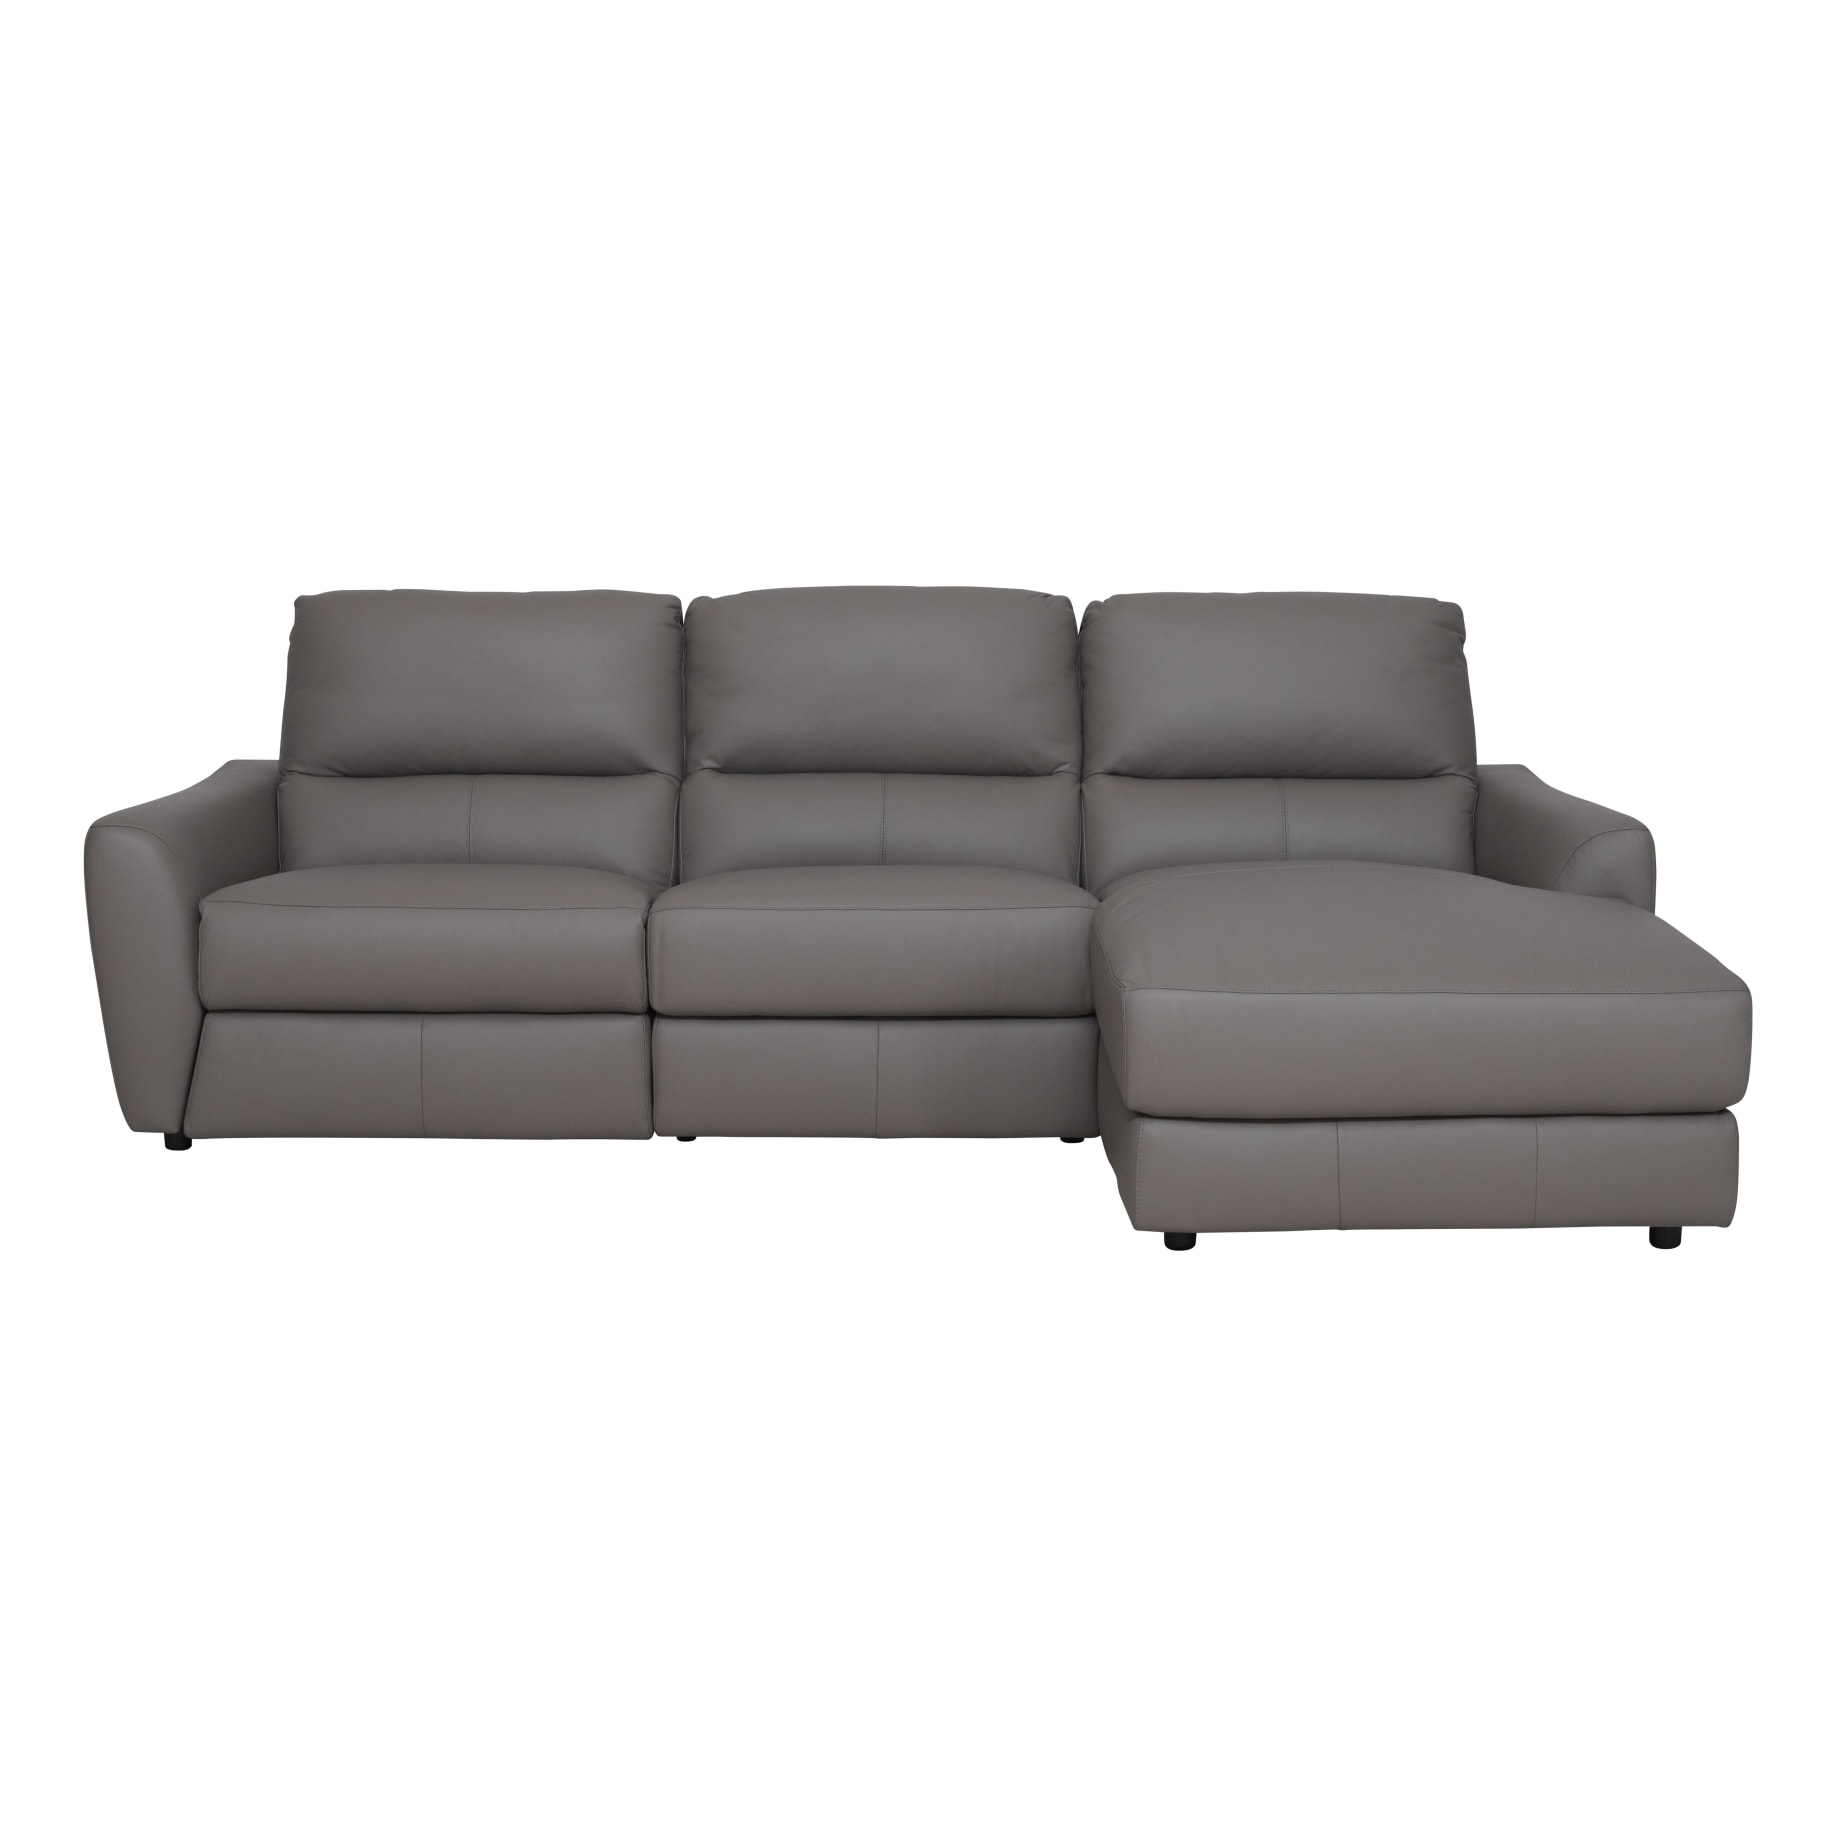 Portland 3 + Chaise RHF Recliner in Leather Grey